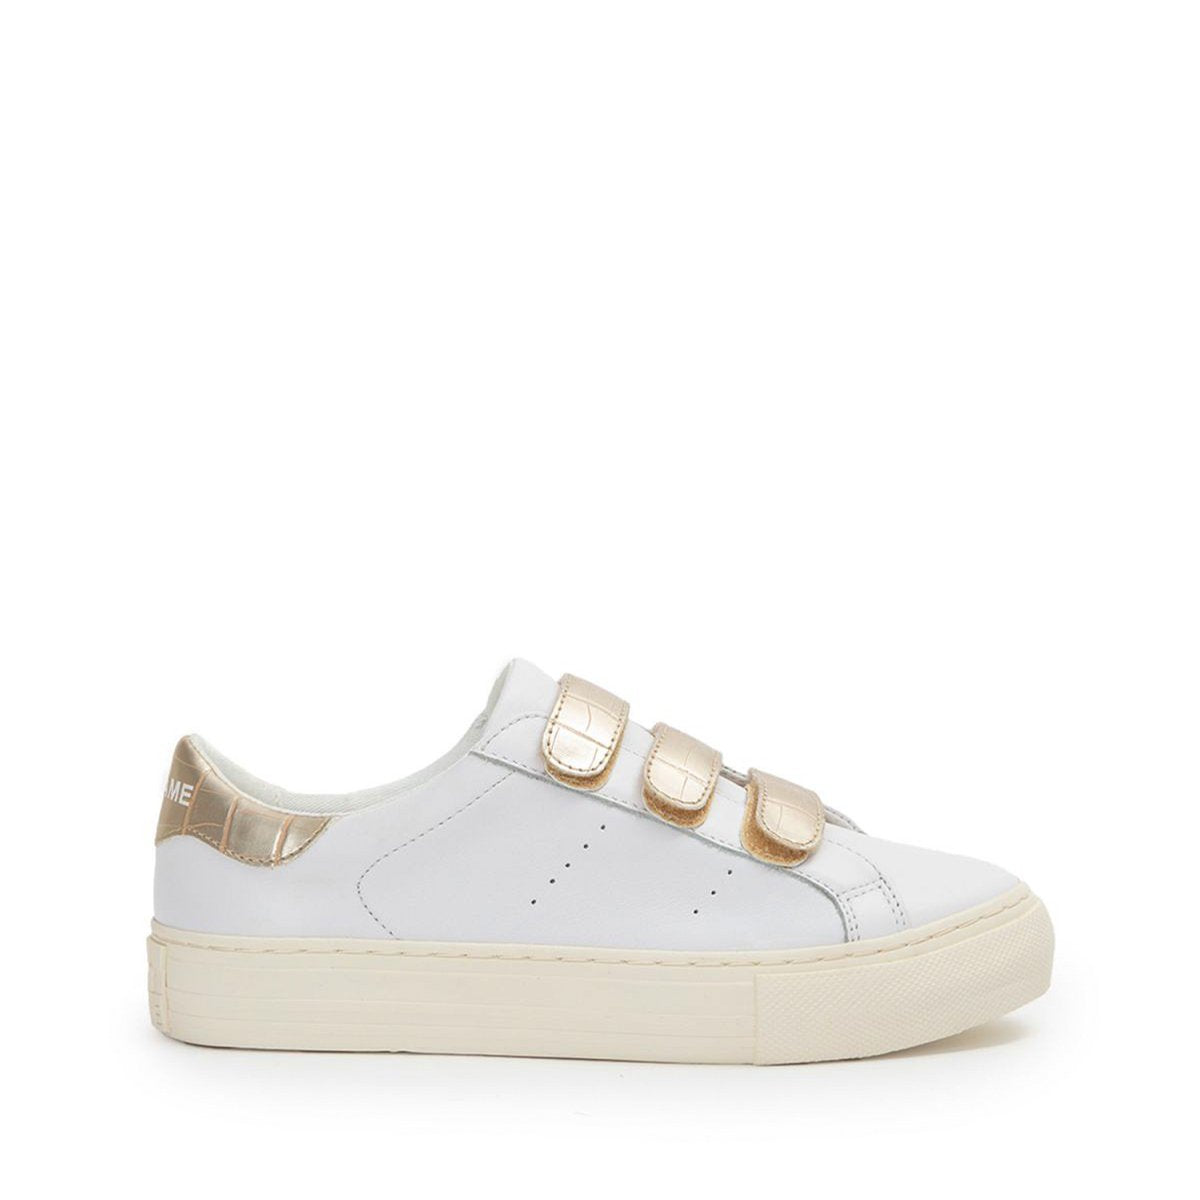 Arcade Straps White Gold Sneakers KNGDSC0474 - 1